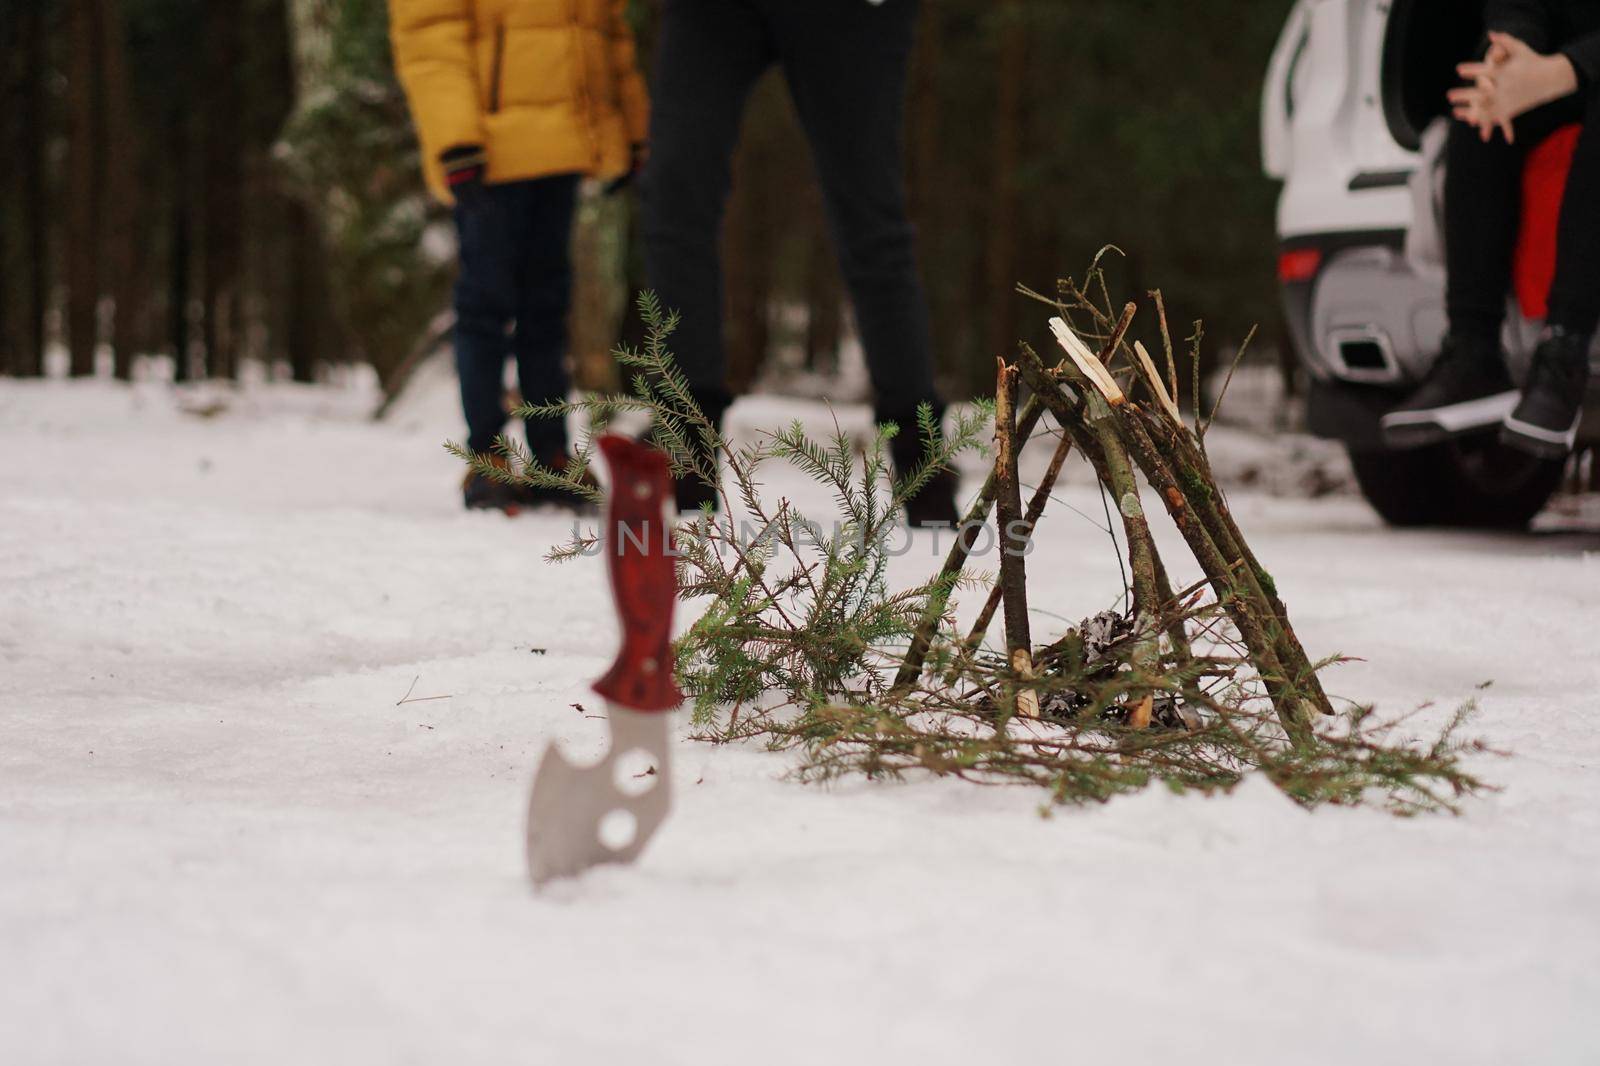 Tourist knife and bonfire in the winter forest. Tourists at rest